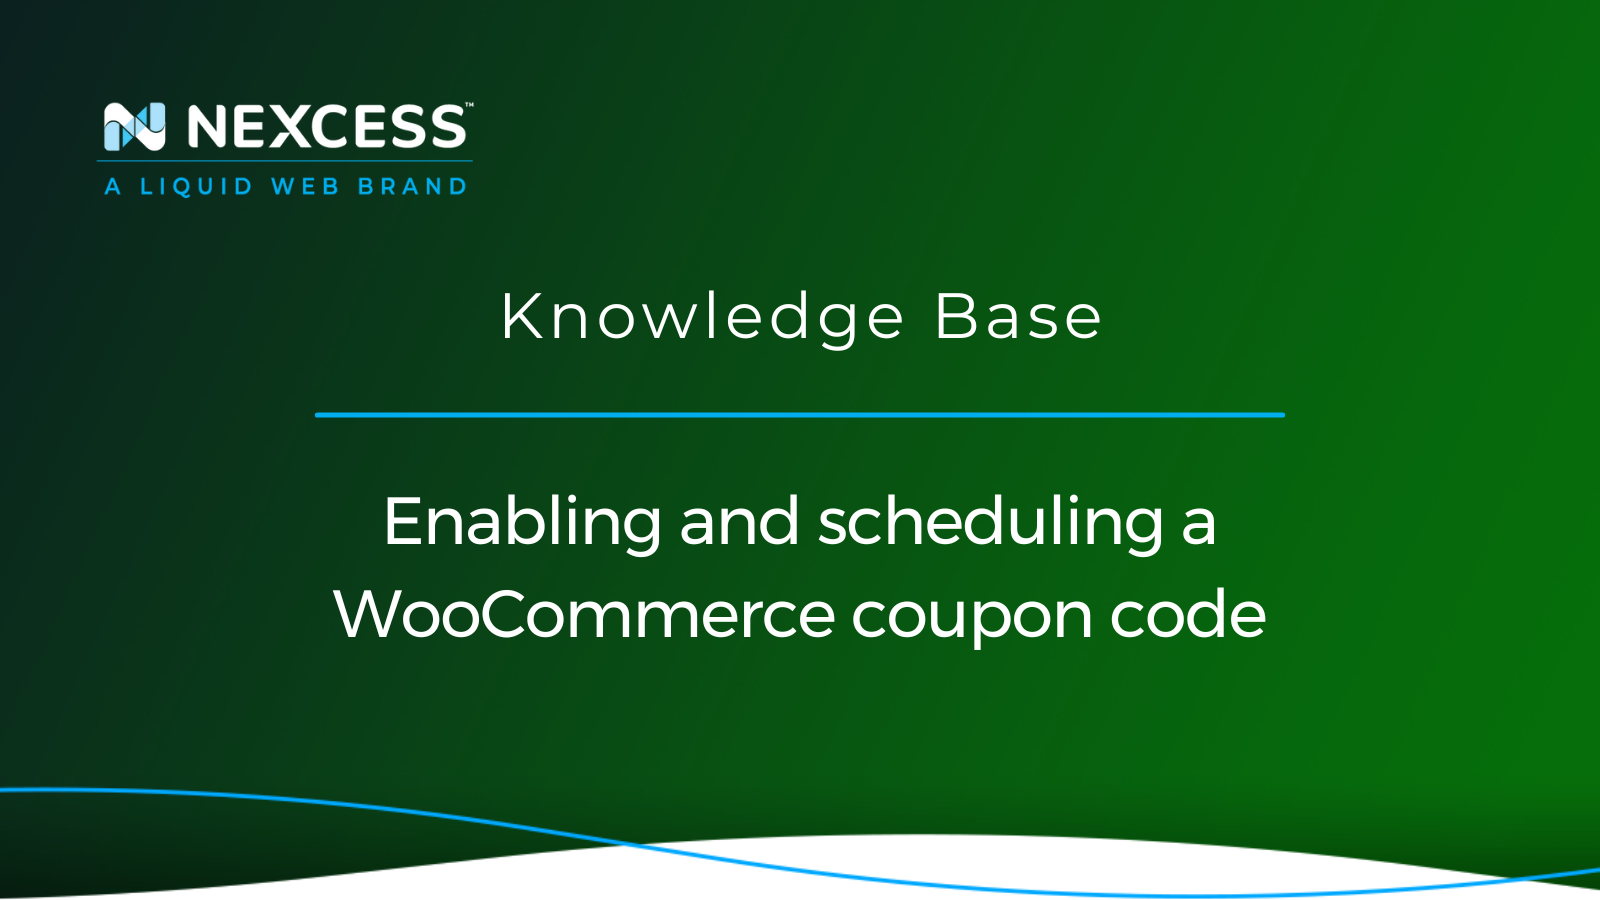 Enabling and scheduling a WooCommerce coupon code